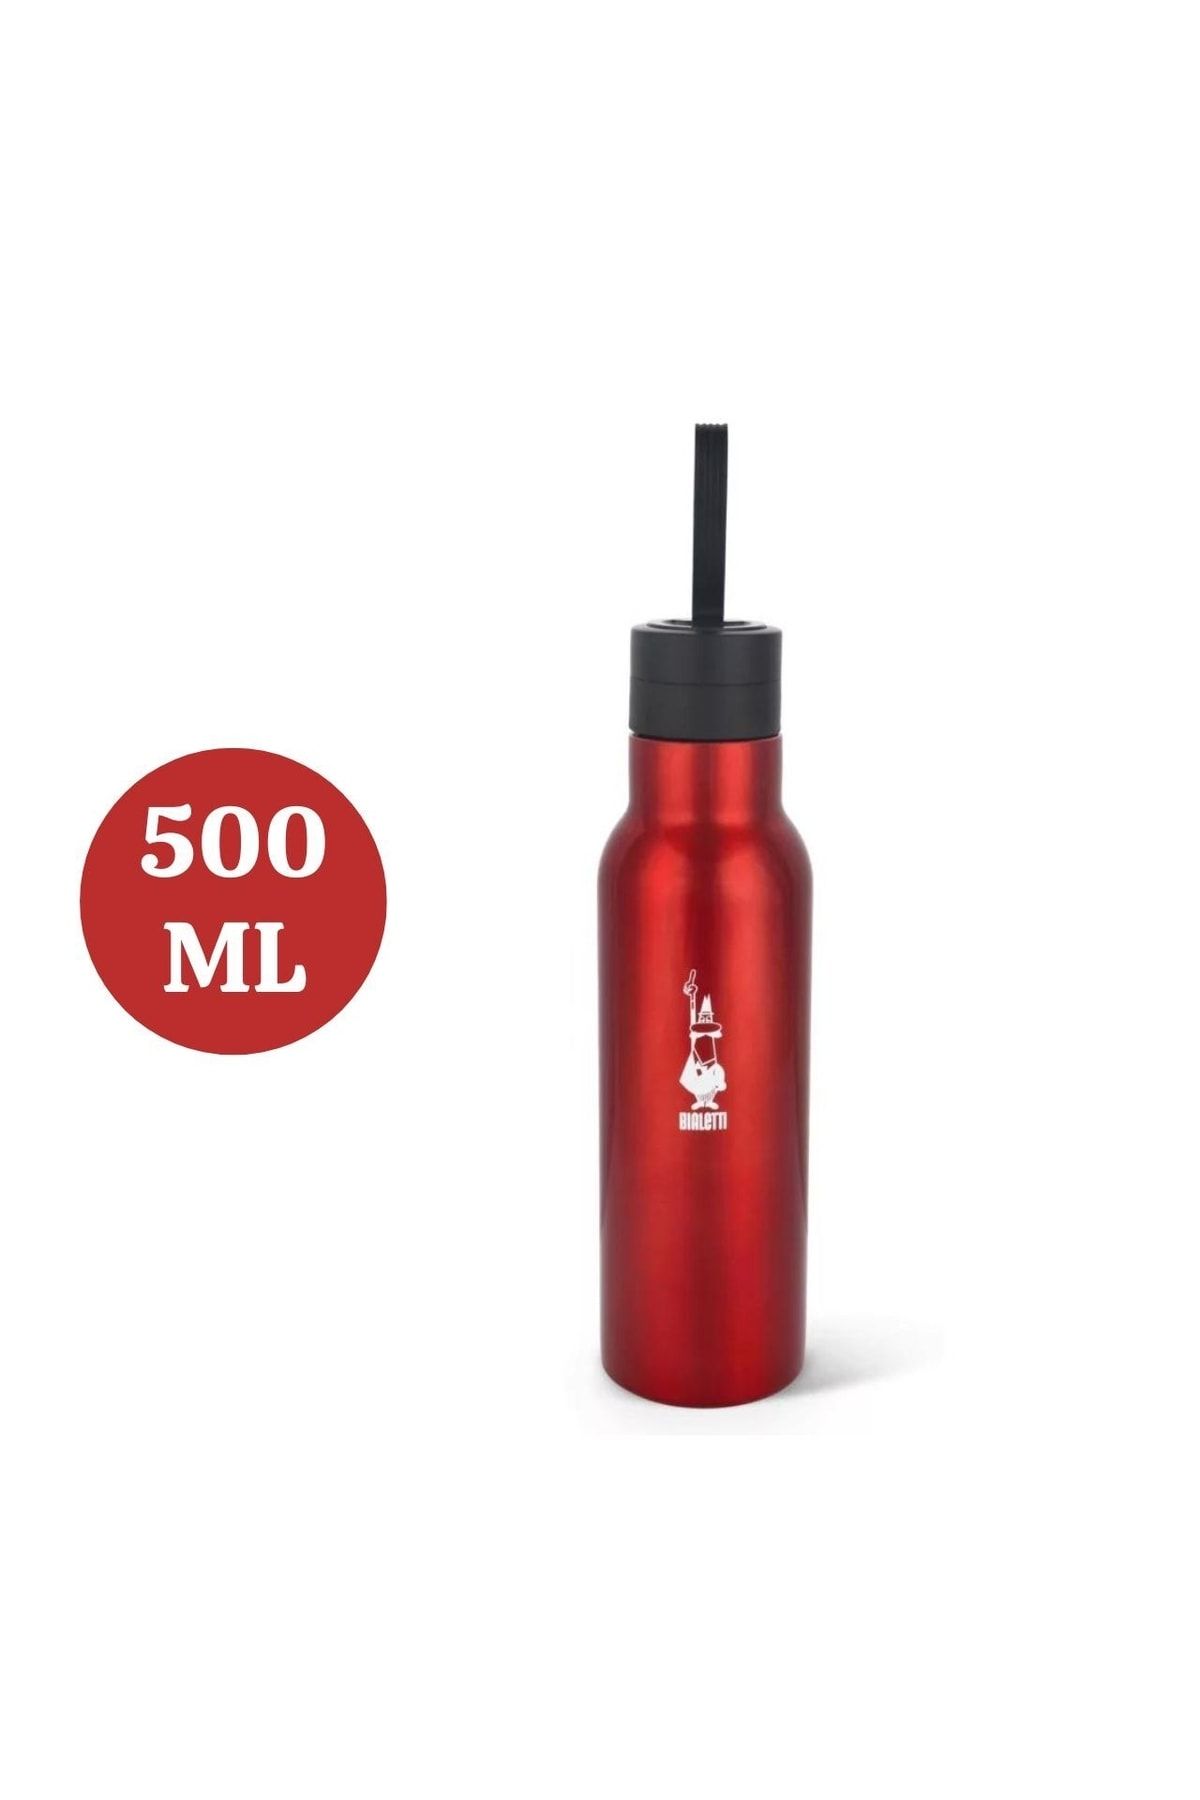 Bialetti Thermic Bottle Red 500 Ml. Termos